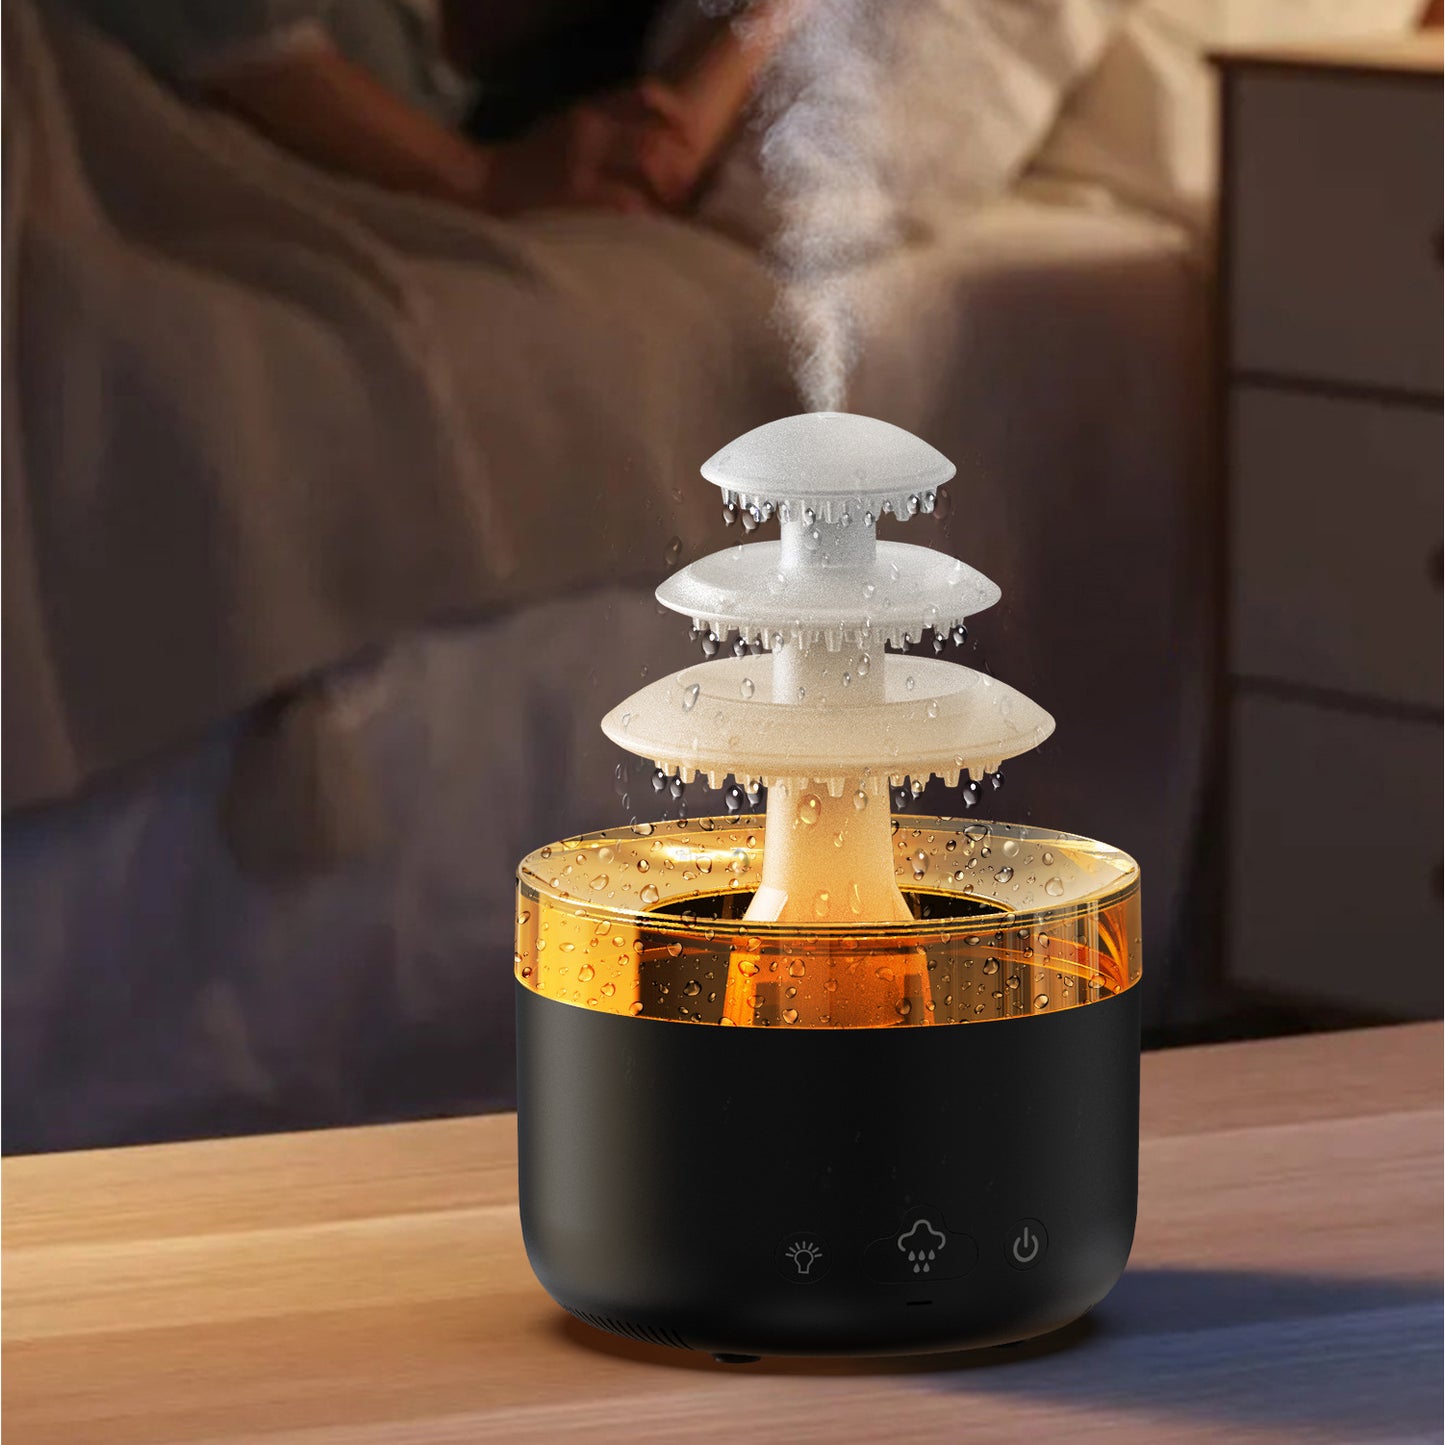 New Rain Air Humidifier, Aromatherapy Diffuser with Essential Oils, Quiet Mist Humidifier with Colorful Light